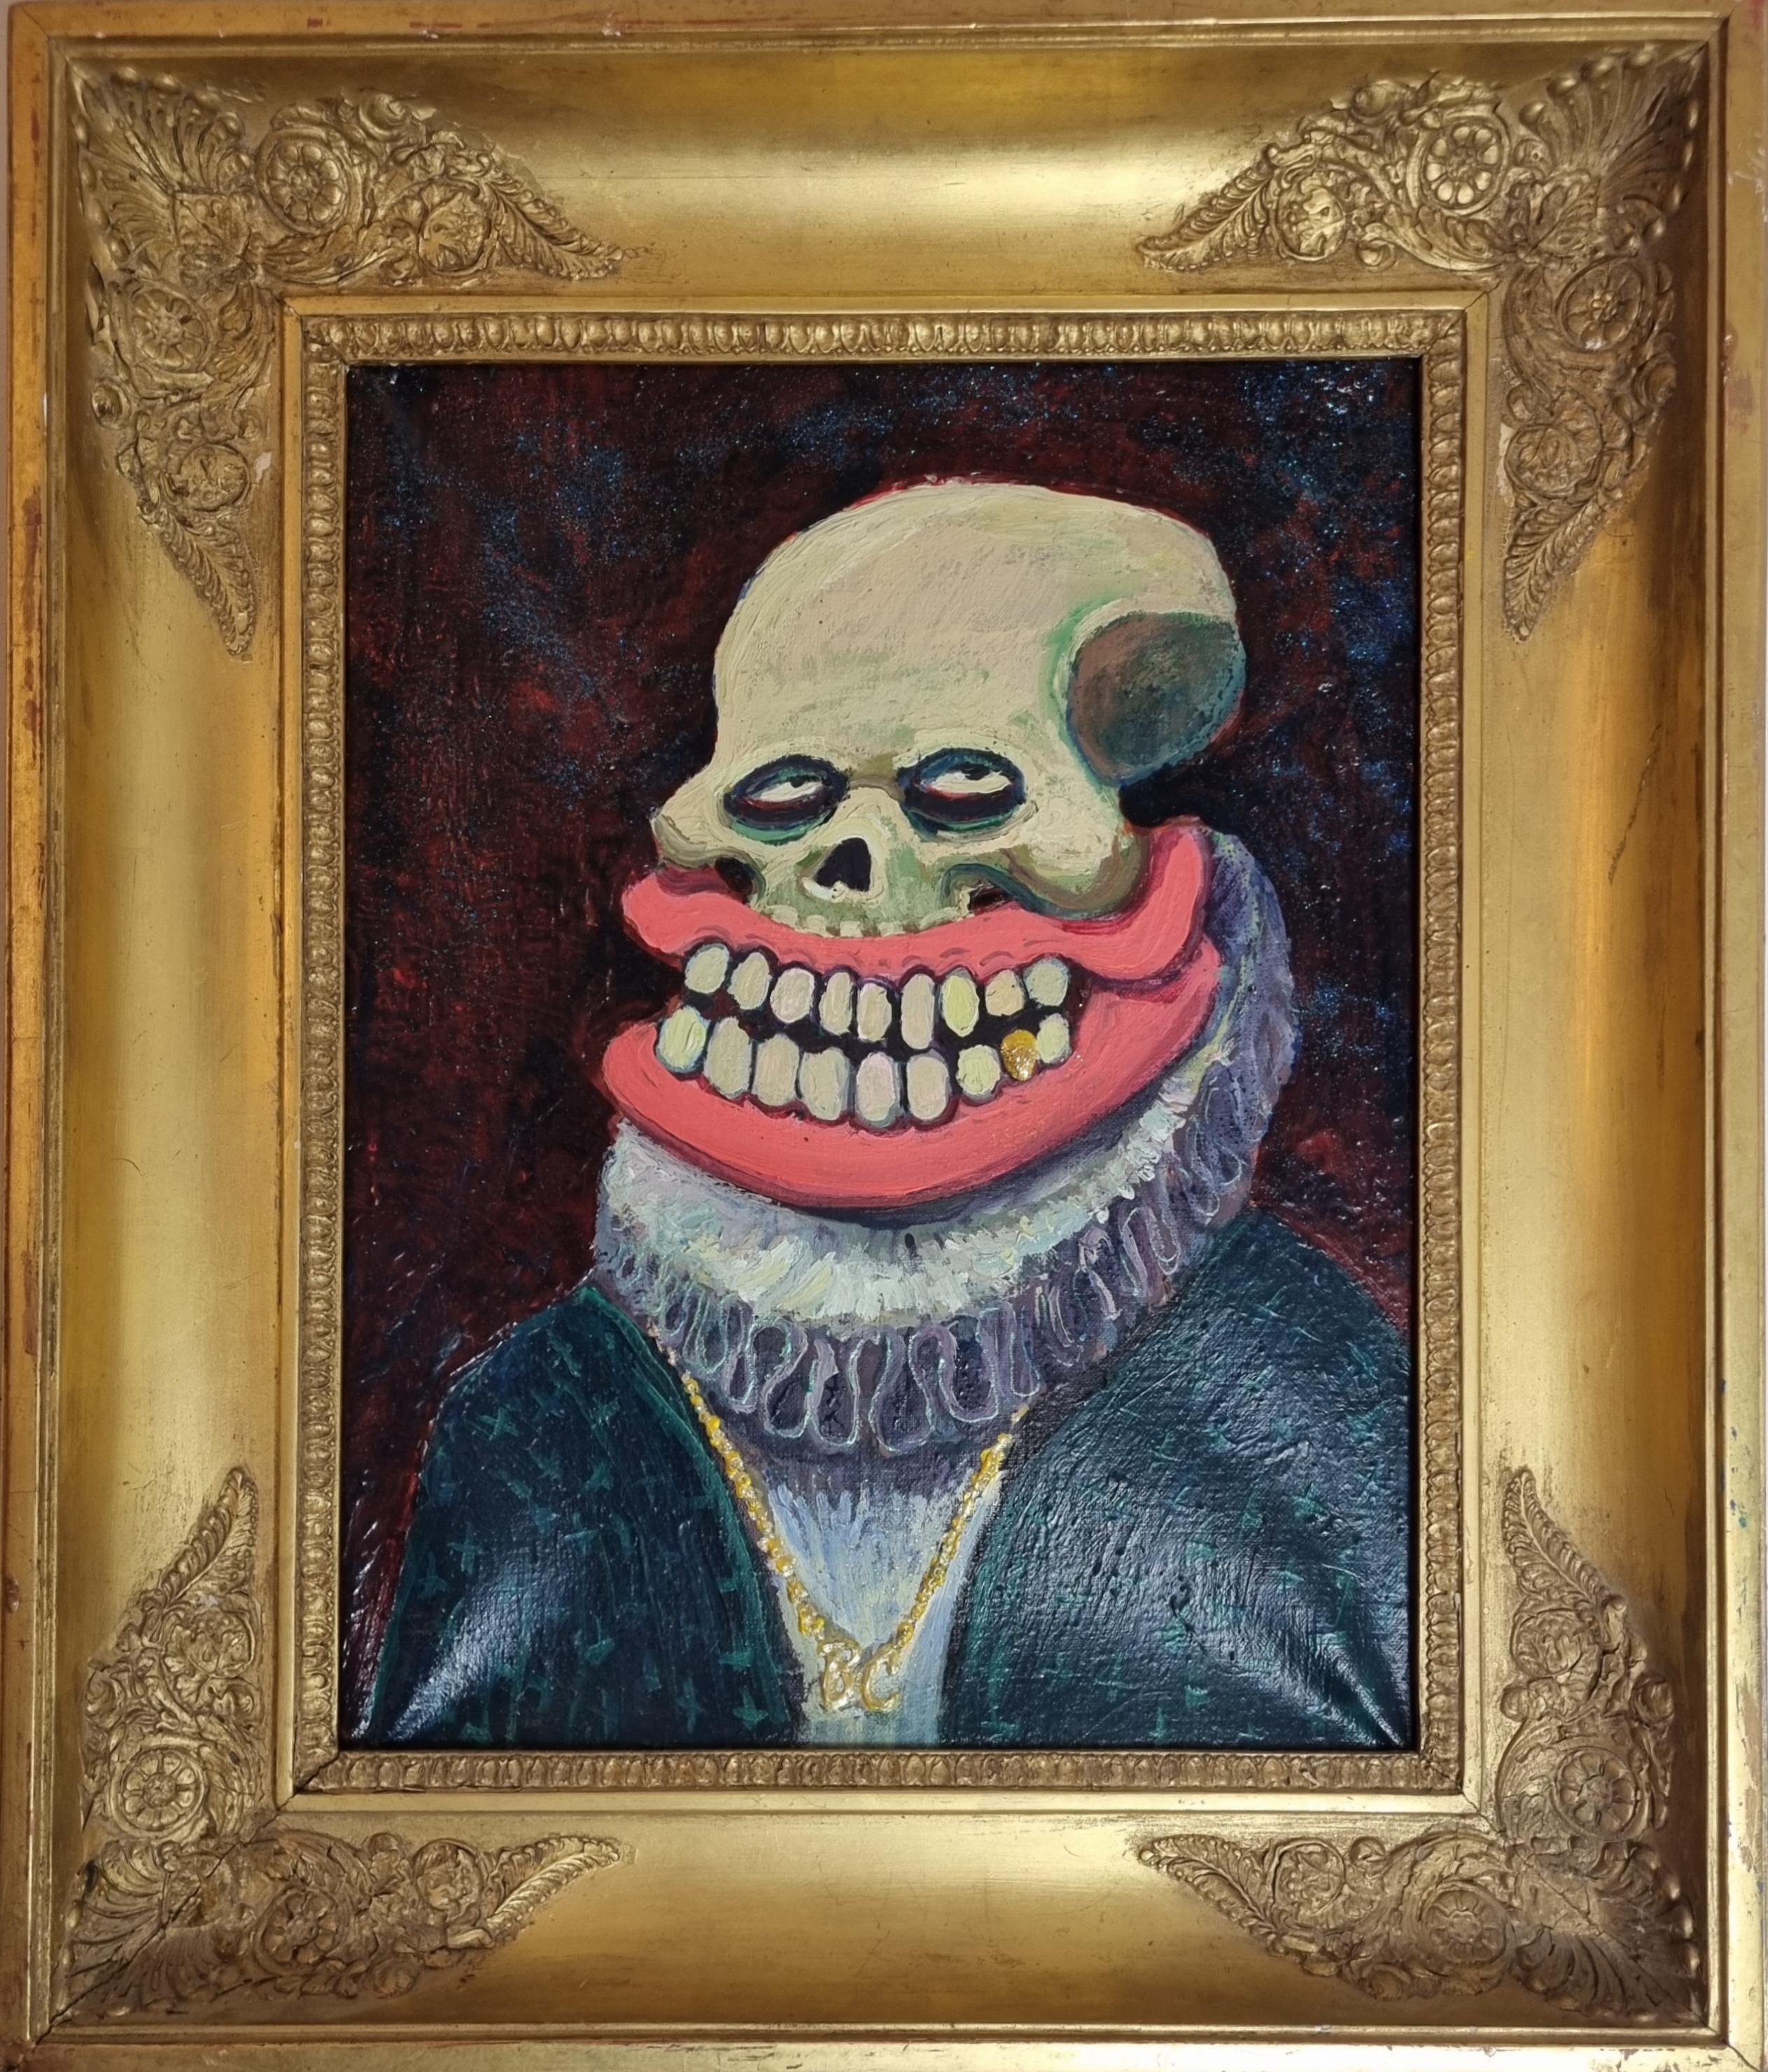 Street Artist , Sweet Toof ,
Oil on canvas in a 19th-century gilt frame is an unmistakable image. This stunning artwork is skillfully framed, adding a touch of elegance to its captivating presence.

Sweet Toof, the renowned London Street Artist, is